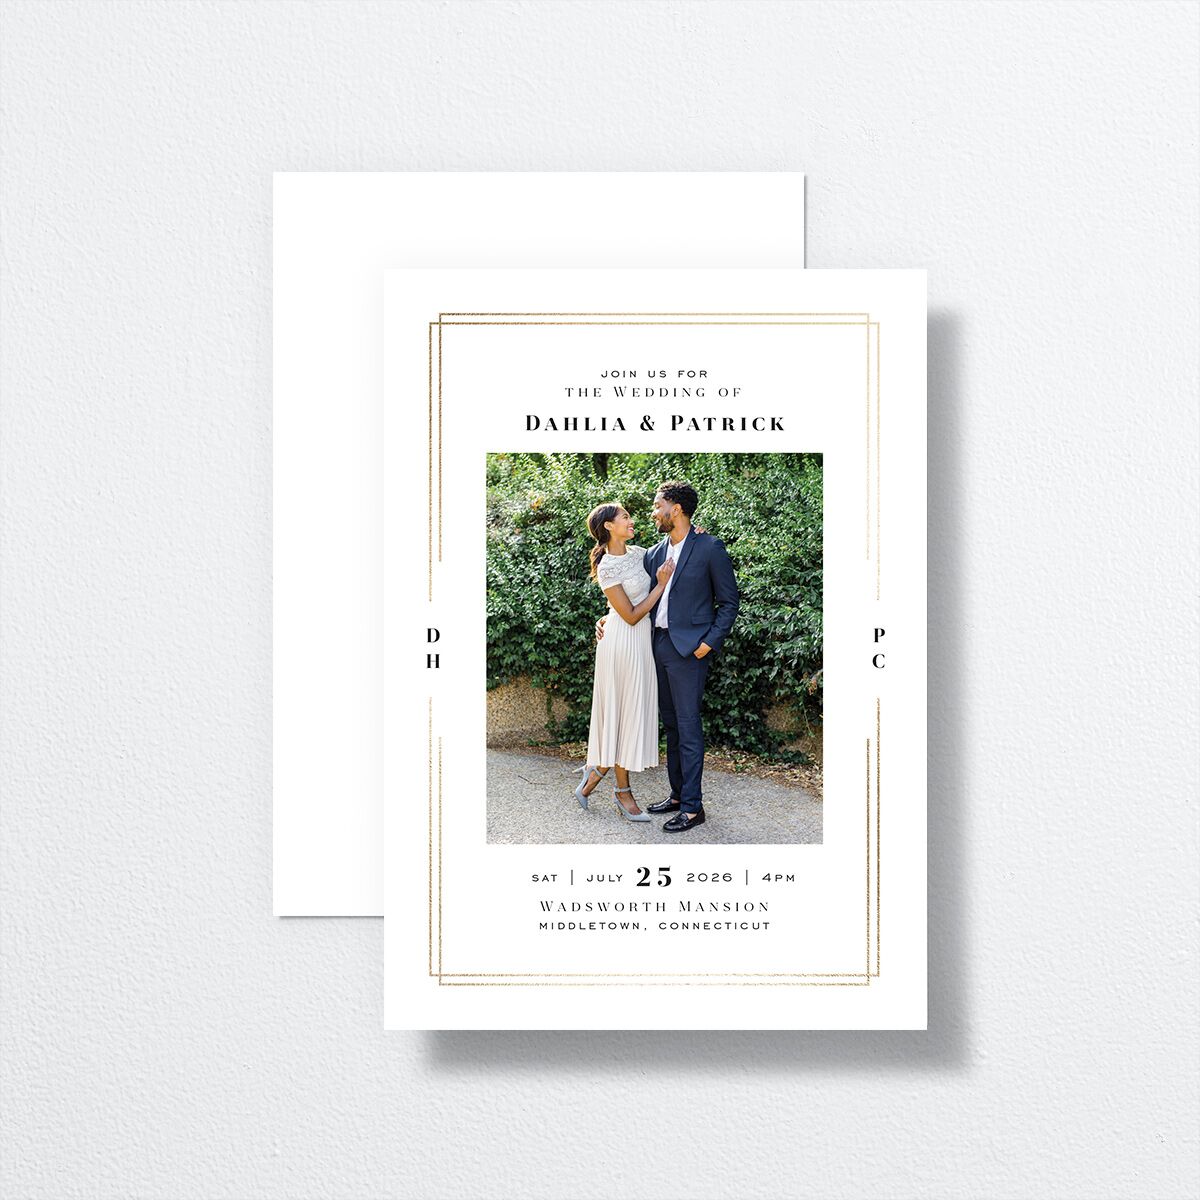 Framed Photo Wedding Invitations front-and-back in white